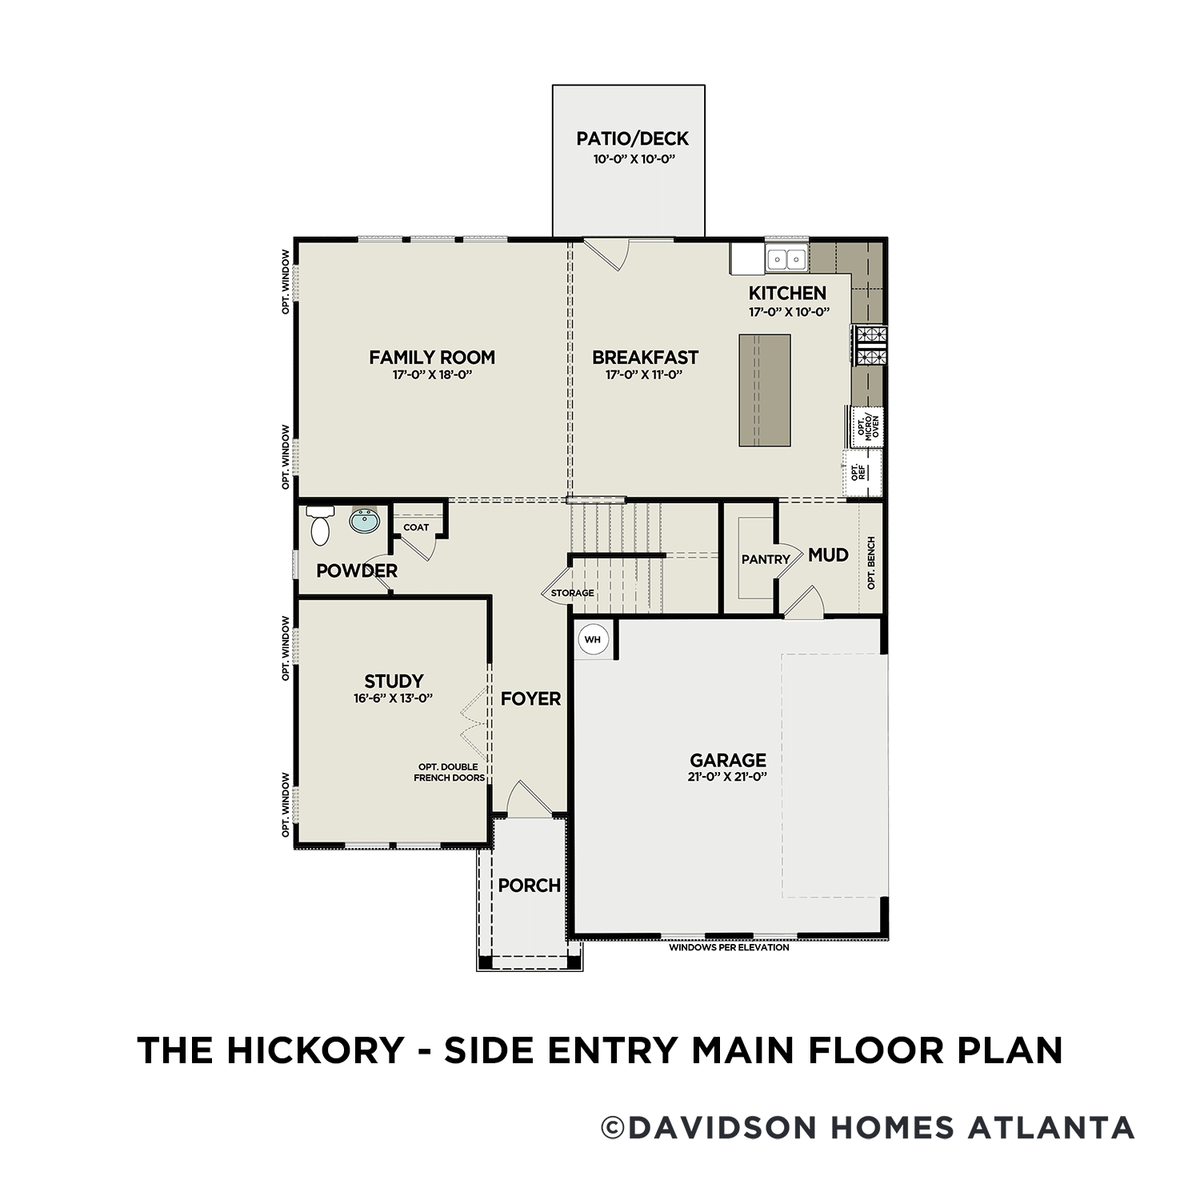 1 - The Hickory C – Side Entry buildable floor plan layout in Davidson Homes' Mountainbrook community.